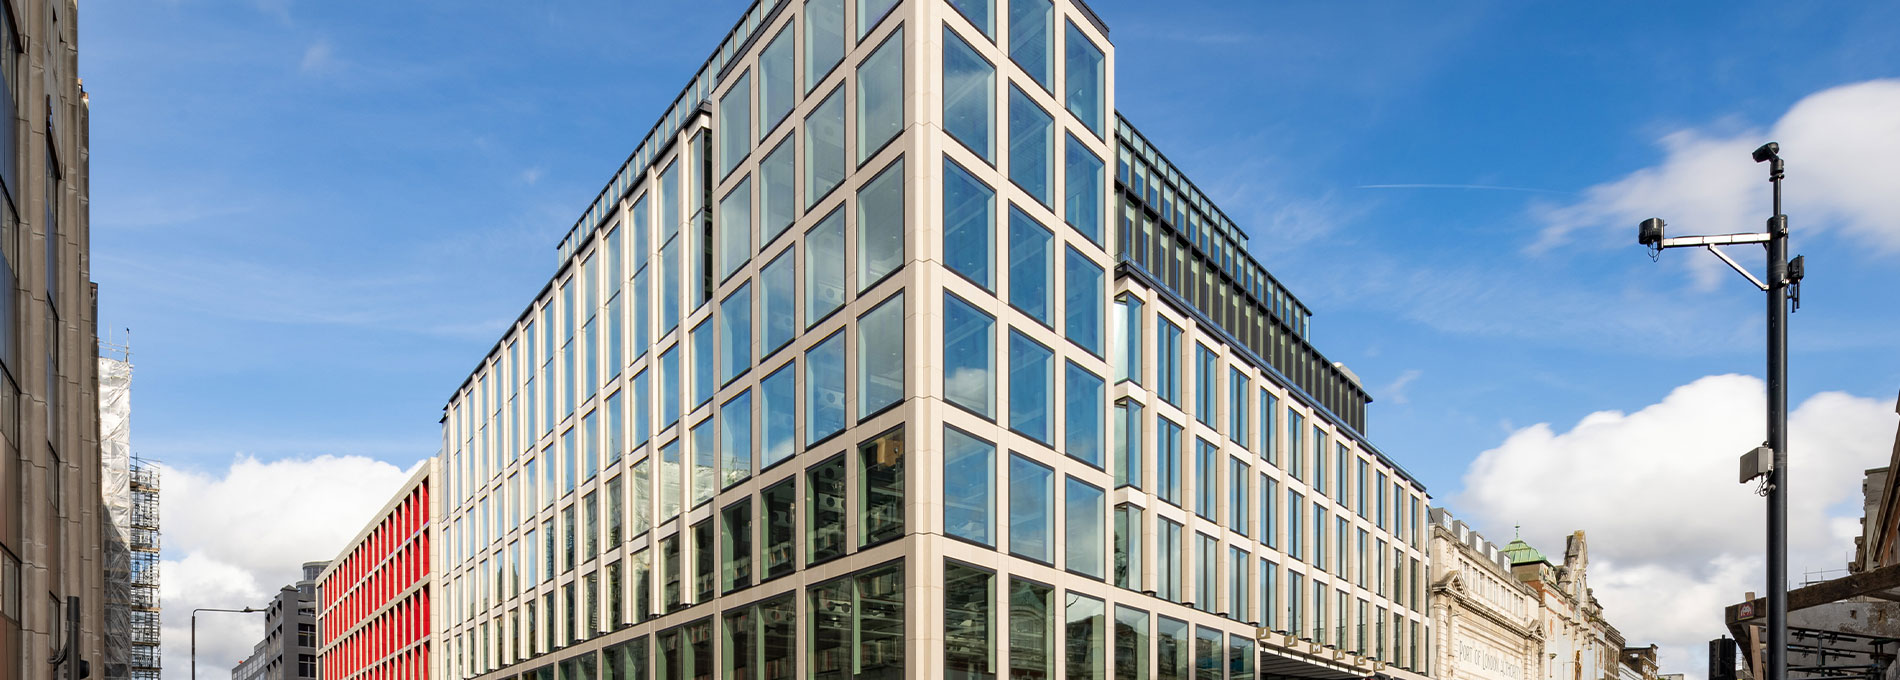 SES Engineering Services (SES), has completed £25m worth of engineering services at The JJ Mack Building, commercial developer Helical’s flagship scheme for sustainability.